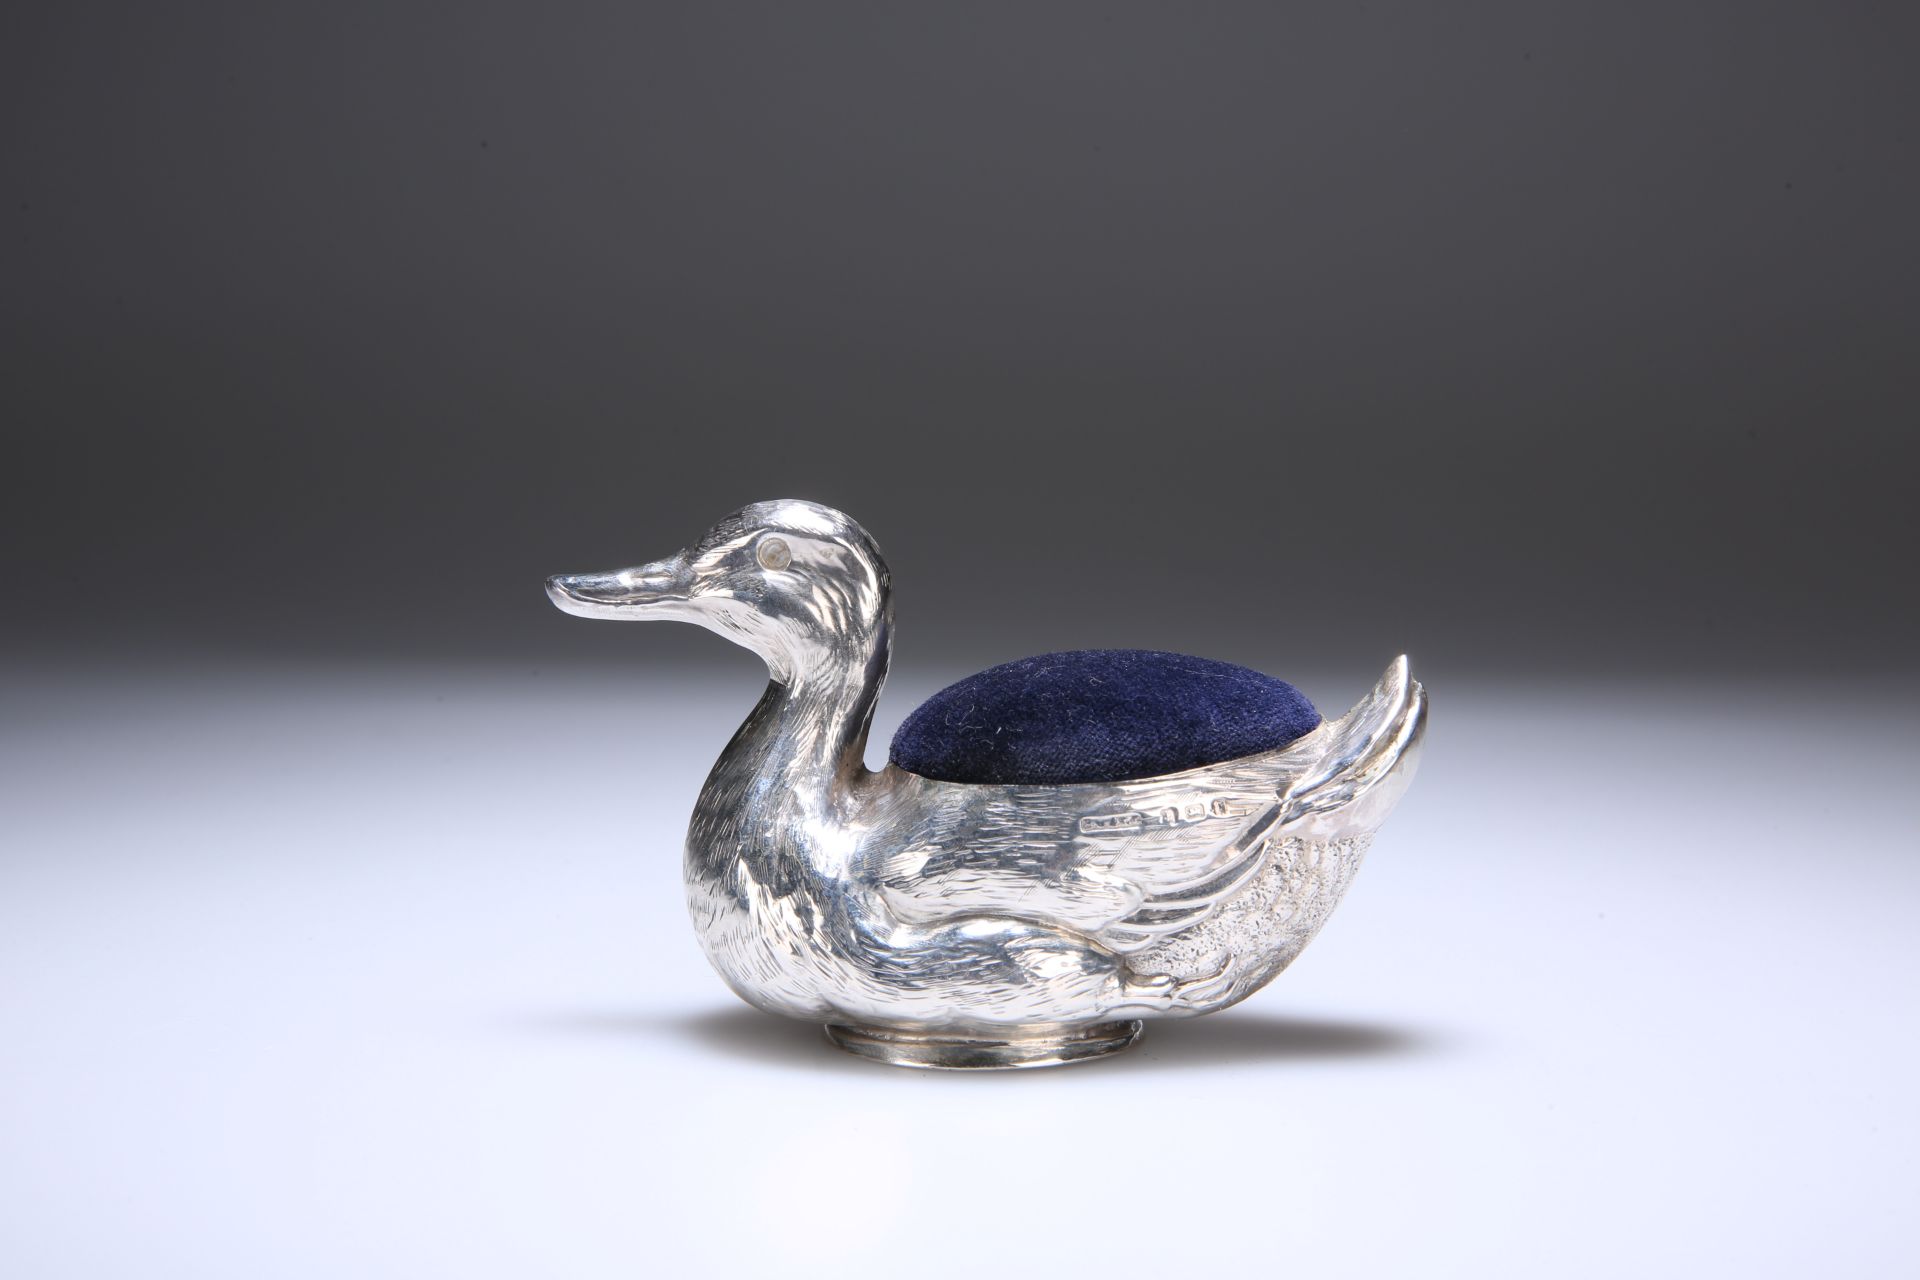 AN EDWARDIAN SILVER NOVELTY PIN CUSHION, IN THE FORM OF A DUCK